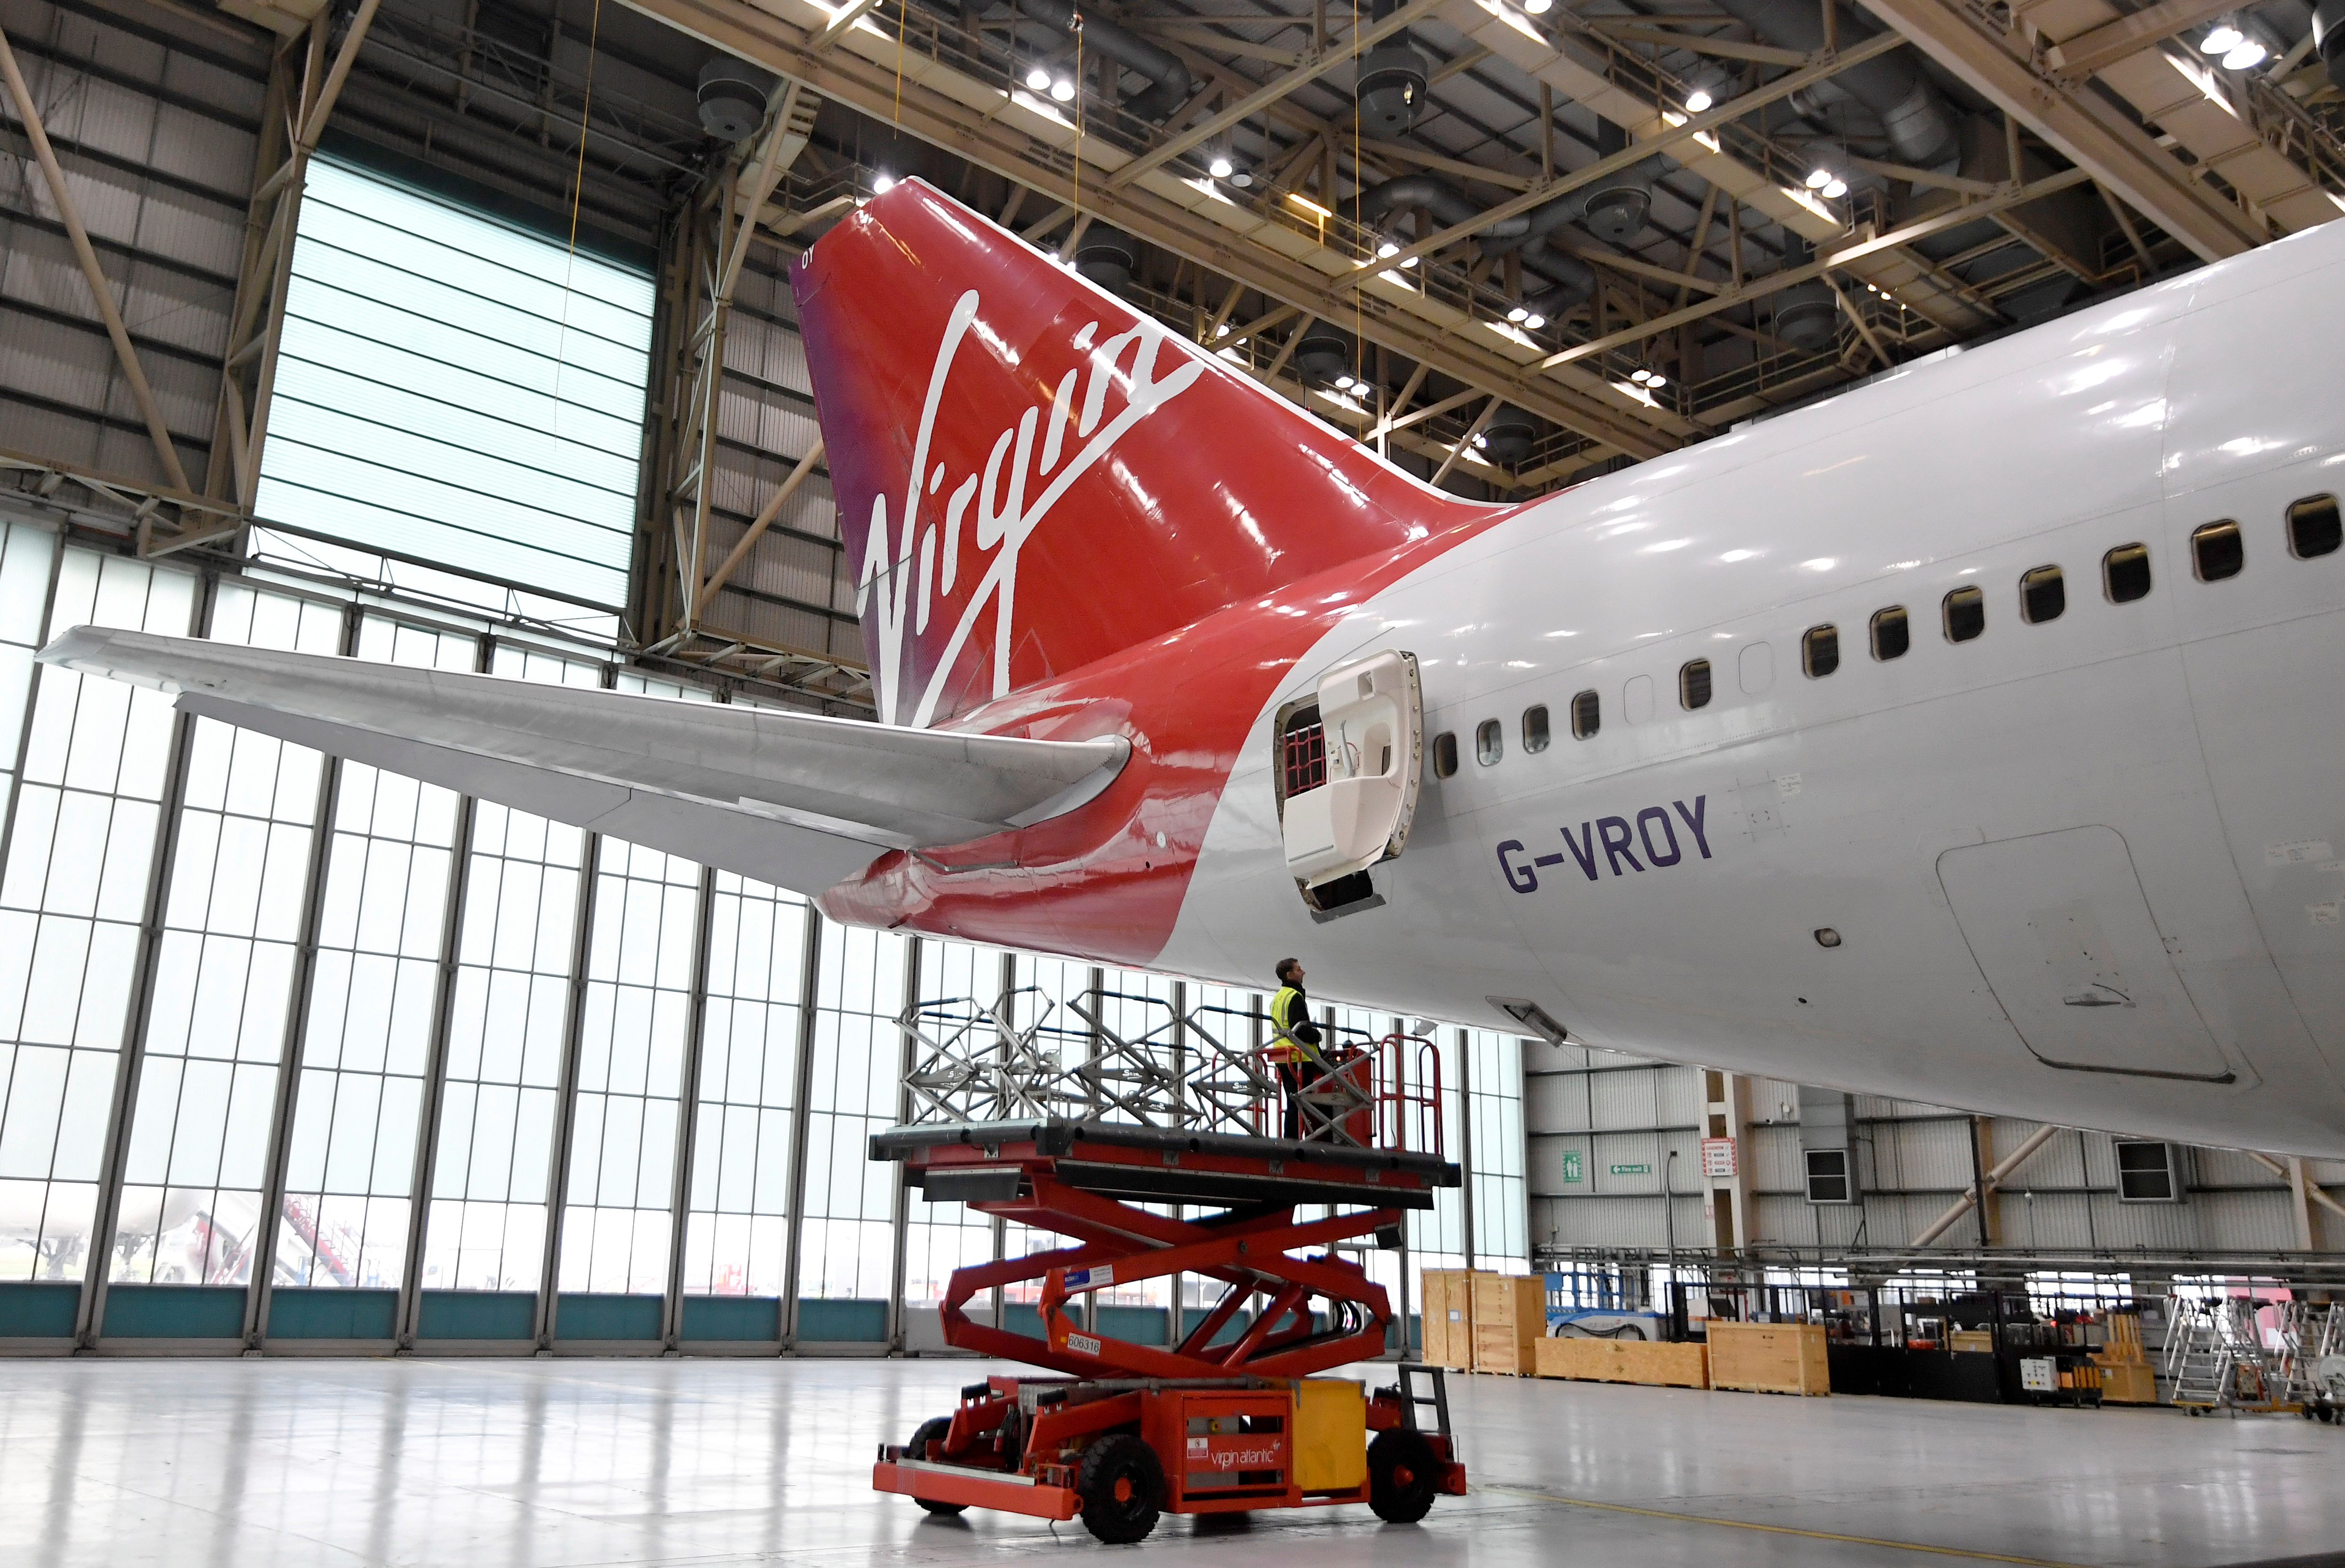 Boeing 747 being retired from passenger service by Virgin Atlantic Airways, before redeployment as a freight and military carrier, seen in a maintenance hanger at Heathrow Airport, London